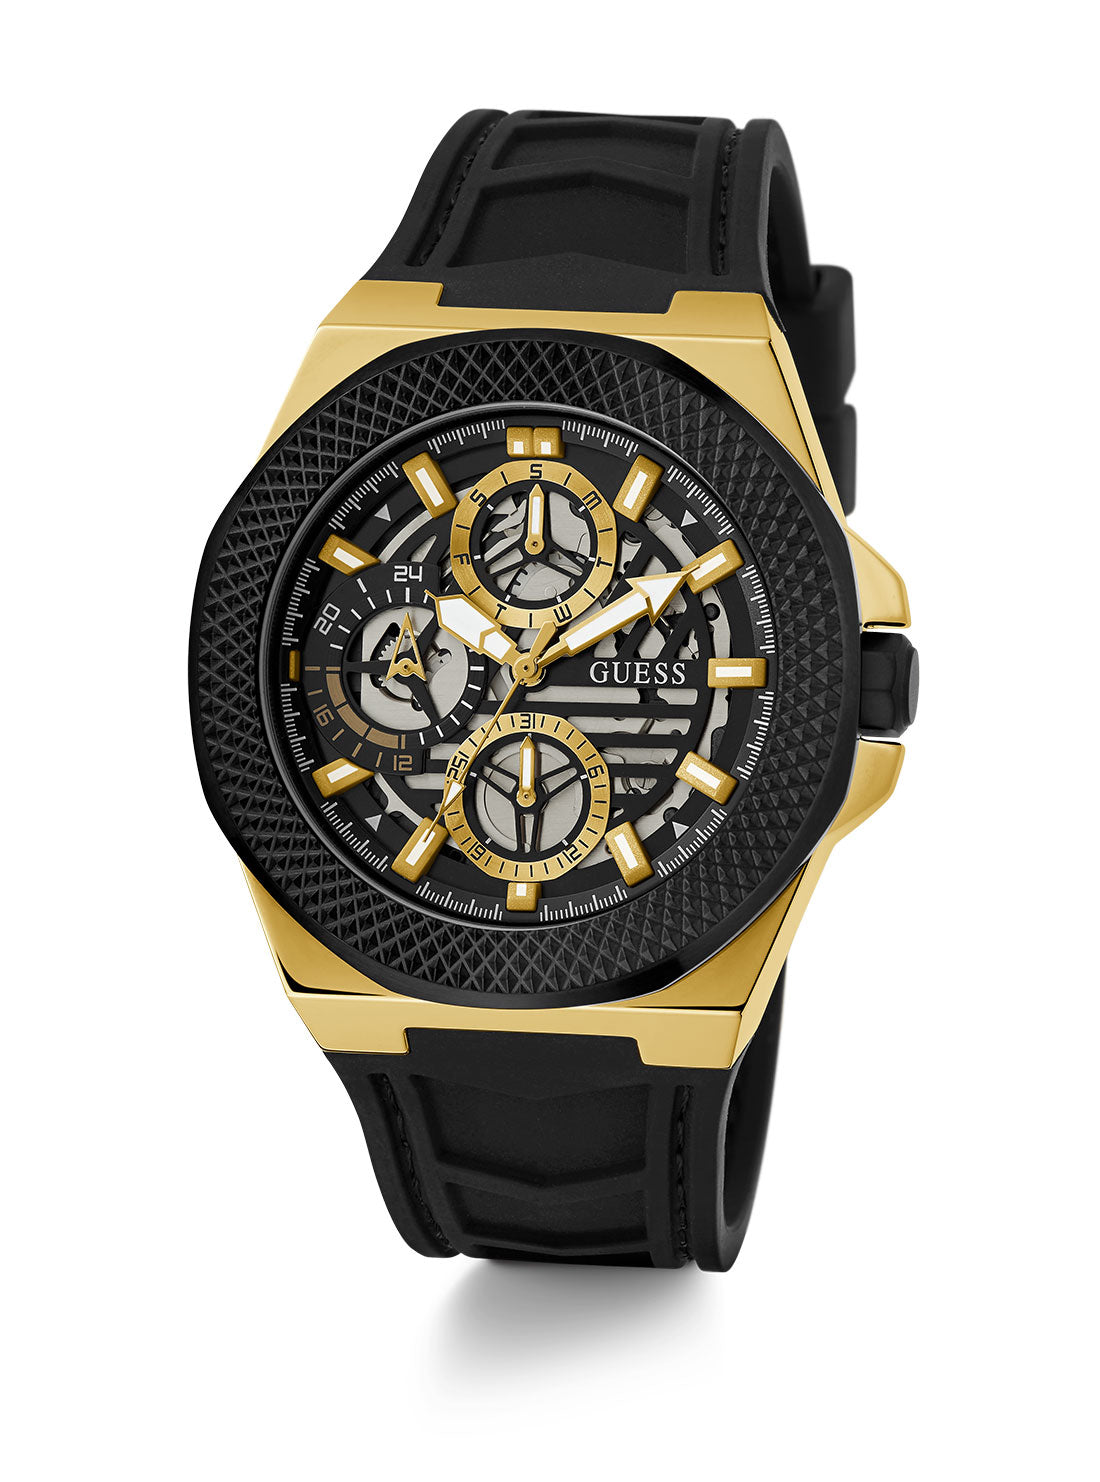 GUESS Men's Black Front Runner Silicone Watch GW0577G2 Full View